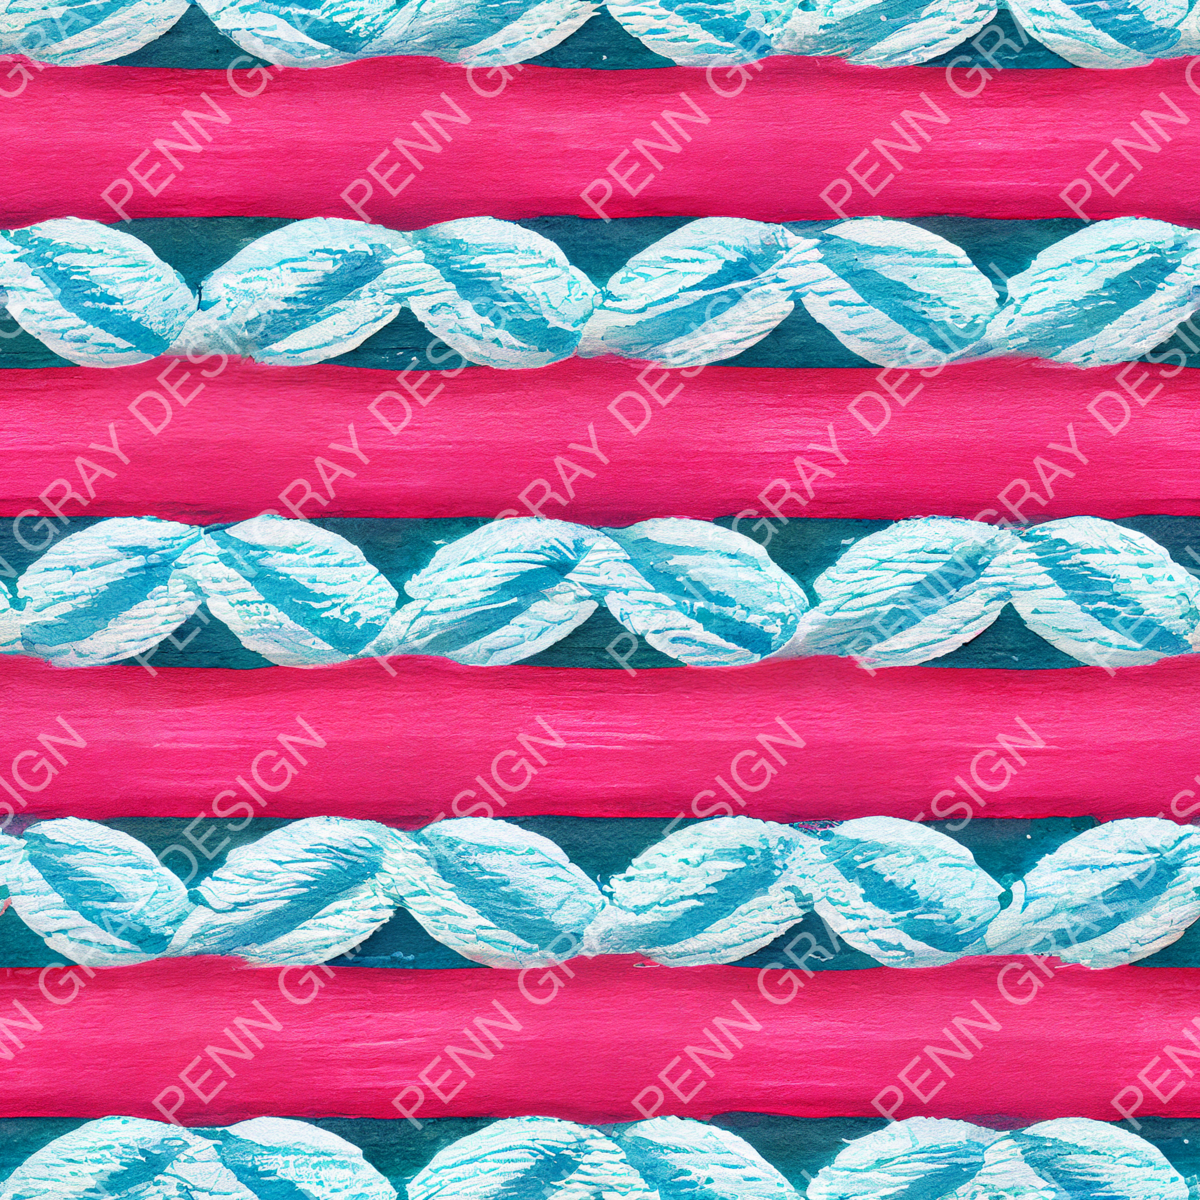 ropes-anchors-01-(watermarked)